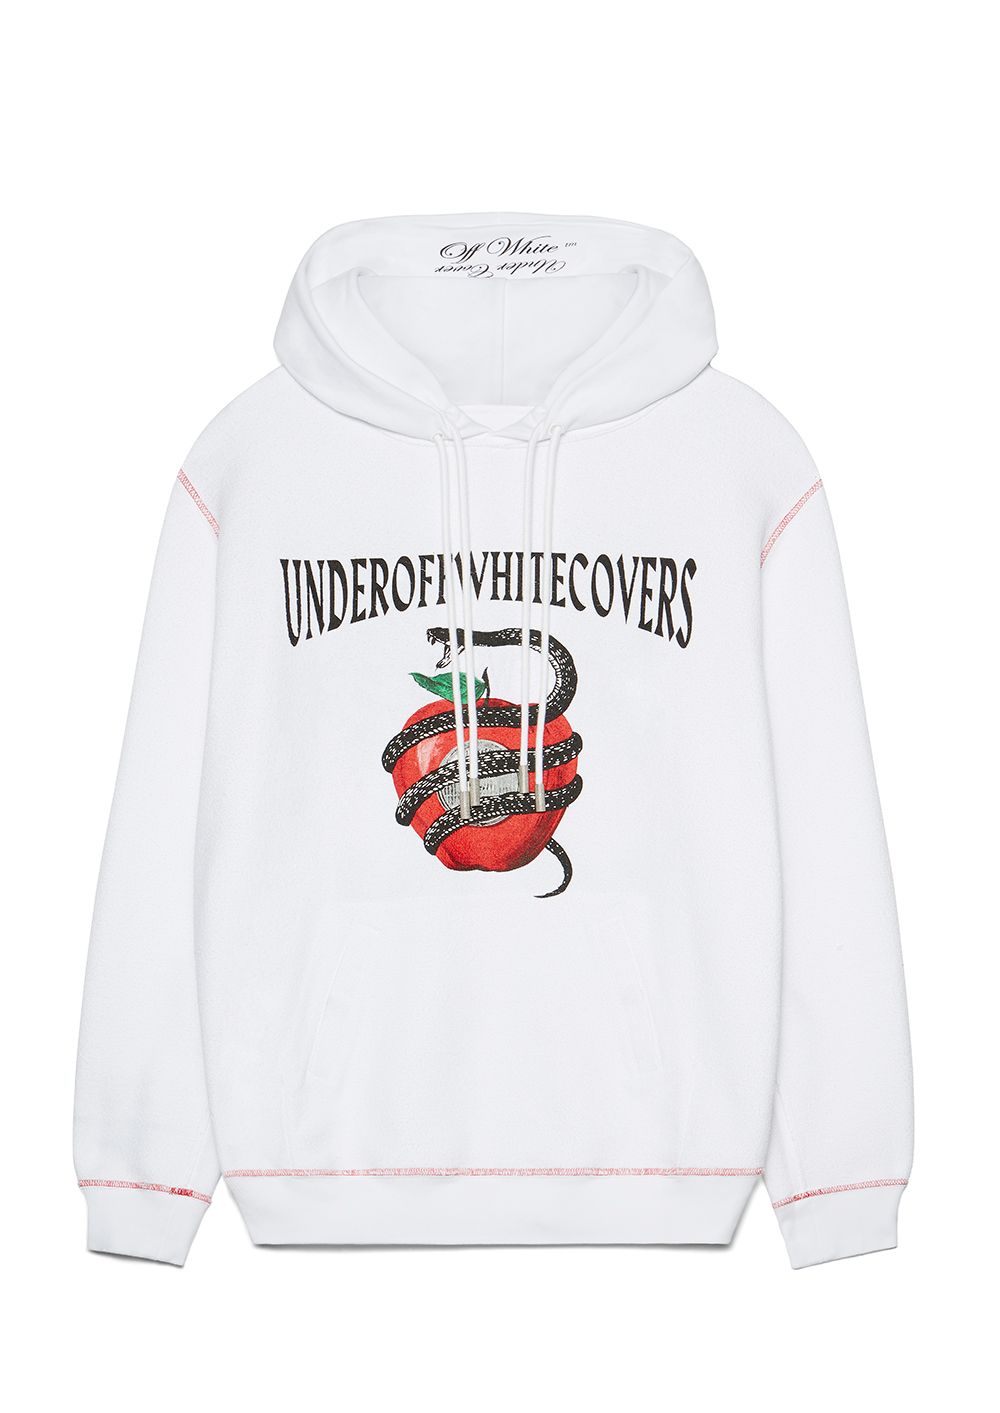 Off-White x Undercover Collaboration Release Date and Pricing